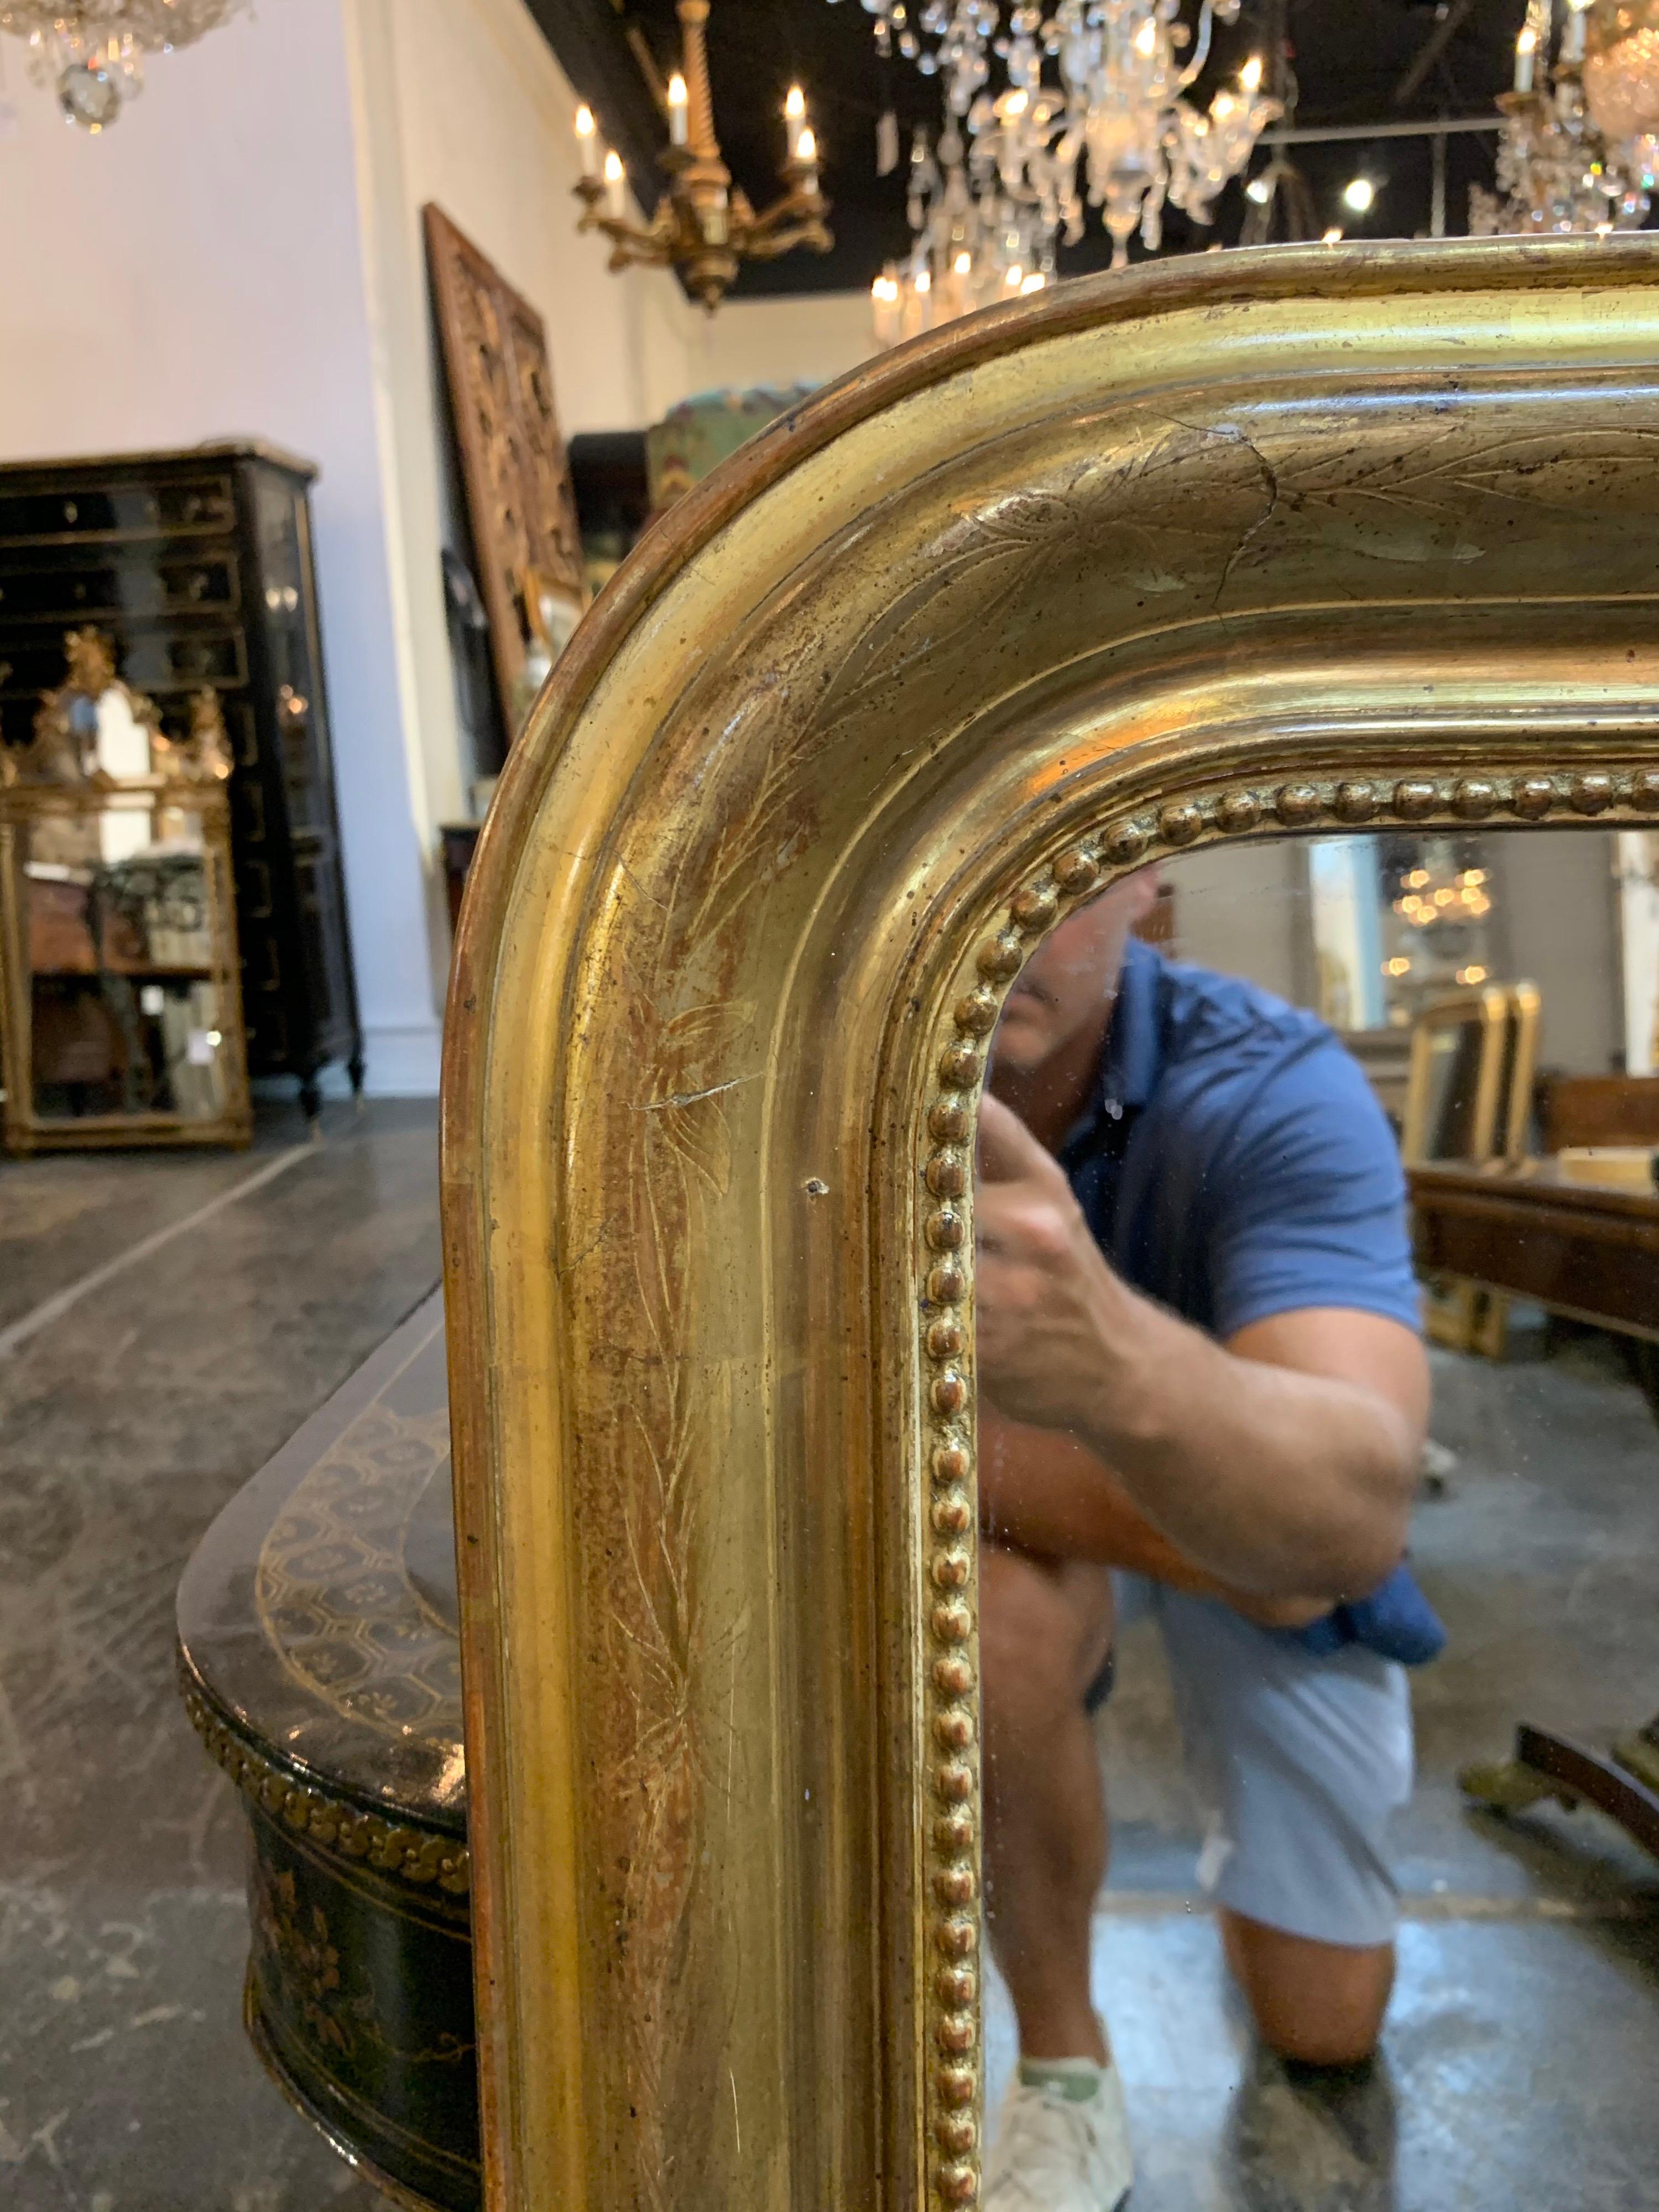 Very fine 19th century gold Louis Philippe mirror. Pretty polished finish with a floral pattern and an inner beaded border. A great addition to an elegant home!